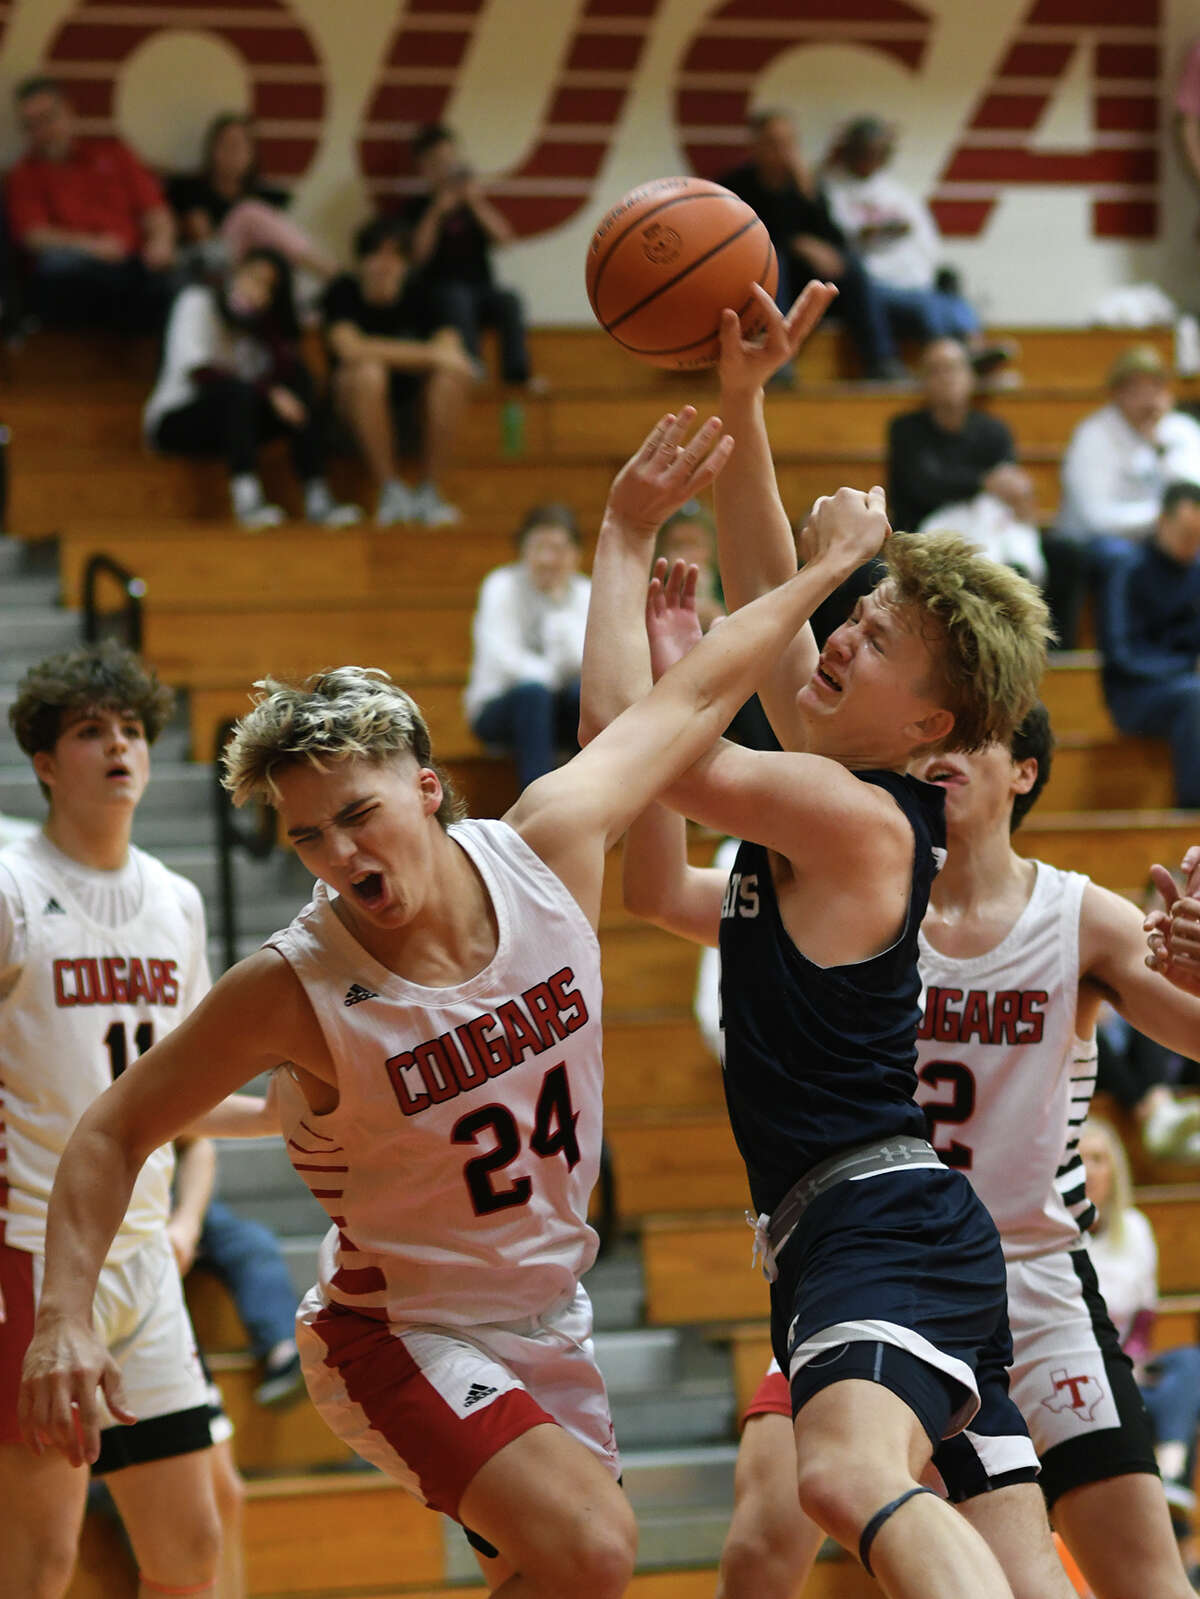 Tomball Memorial junior forward Luke Reder, right, runs into a foul by Tomball senior center Collin Frank (24) on his way to the hoop during the third quarter of their District 15-6A matchup at Tomball High School on Wednesday, Jan. 4, 2023.